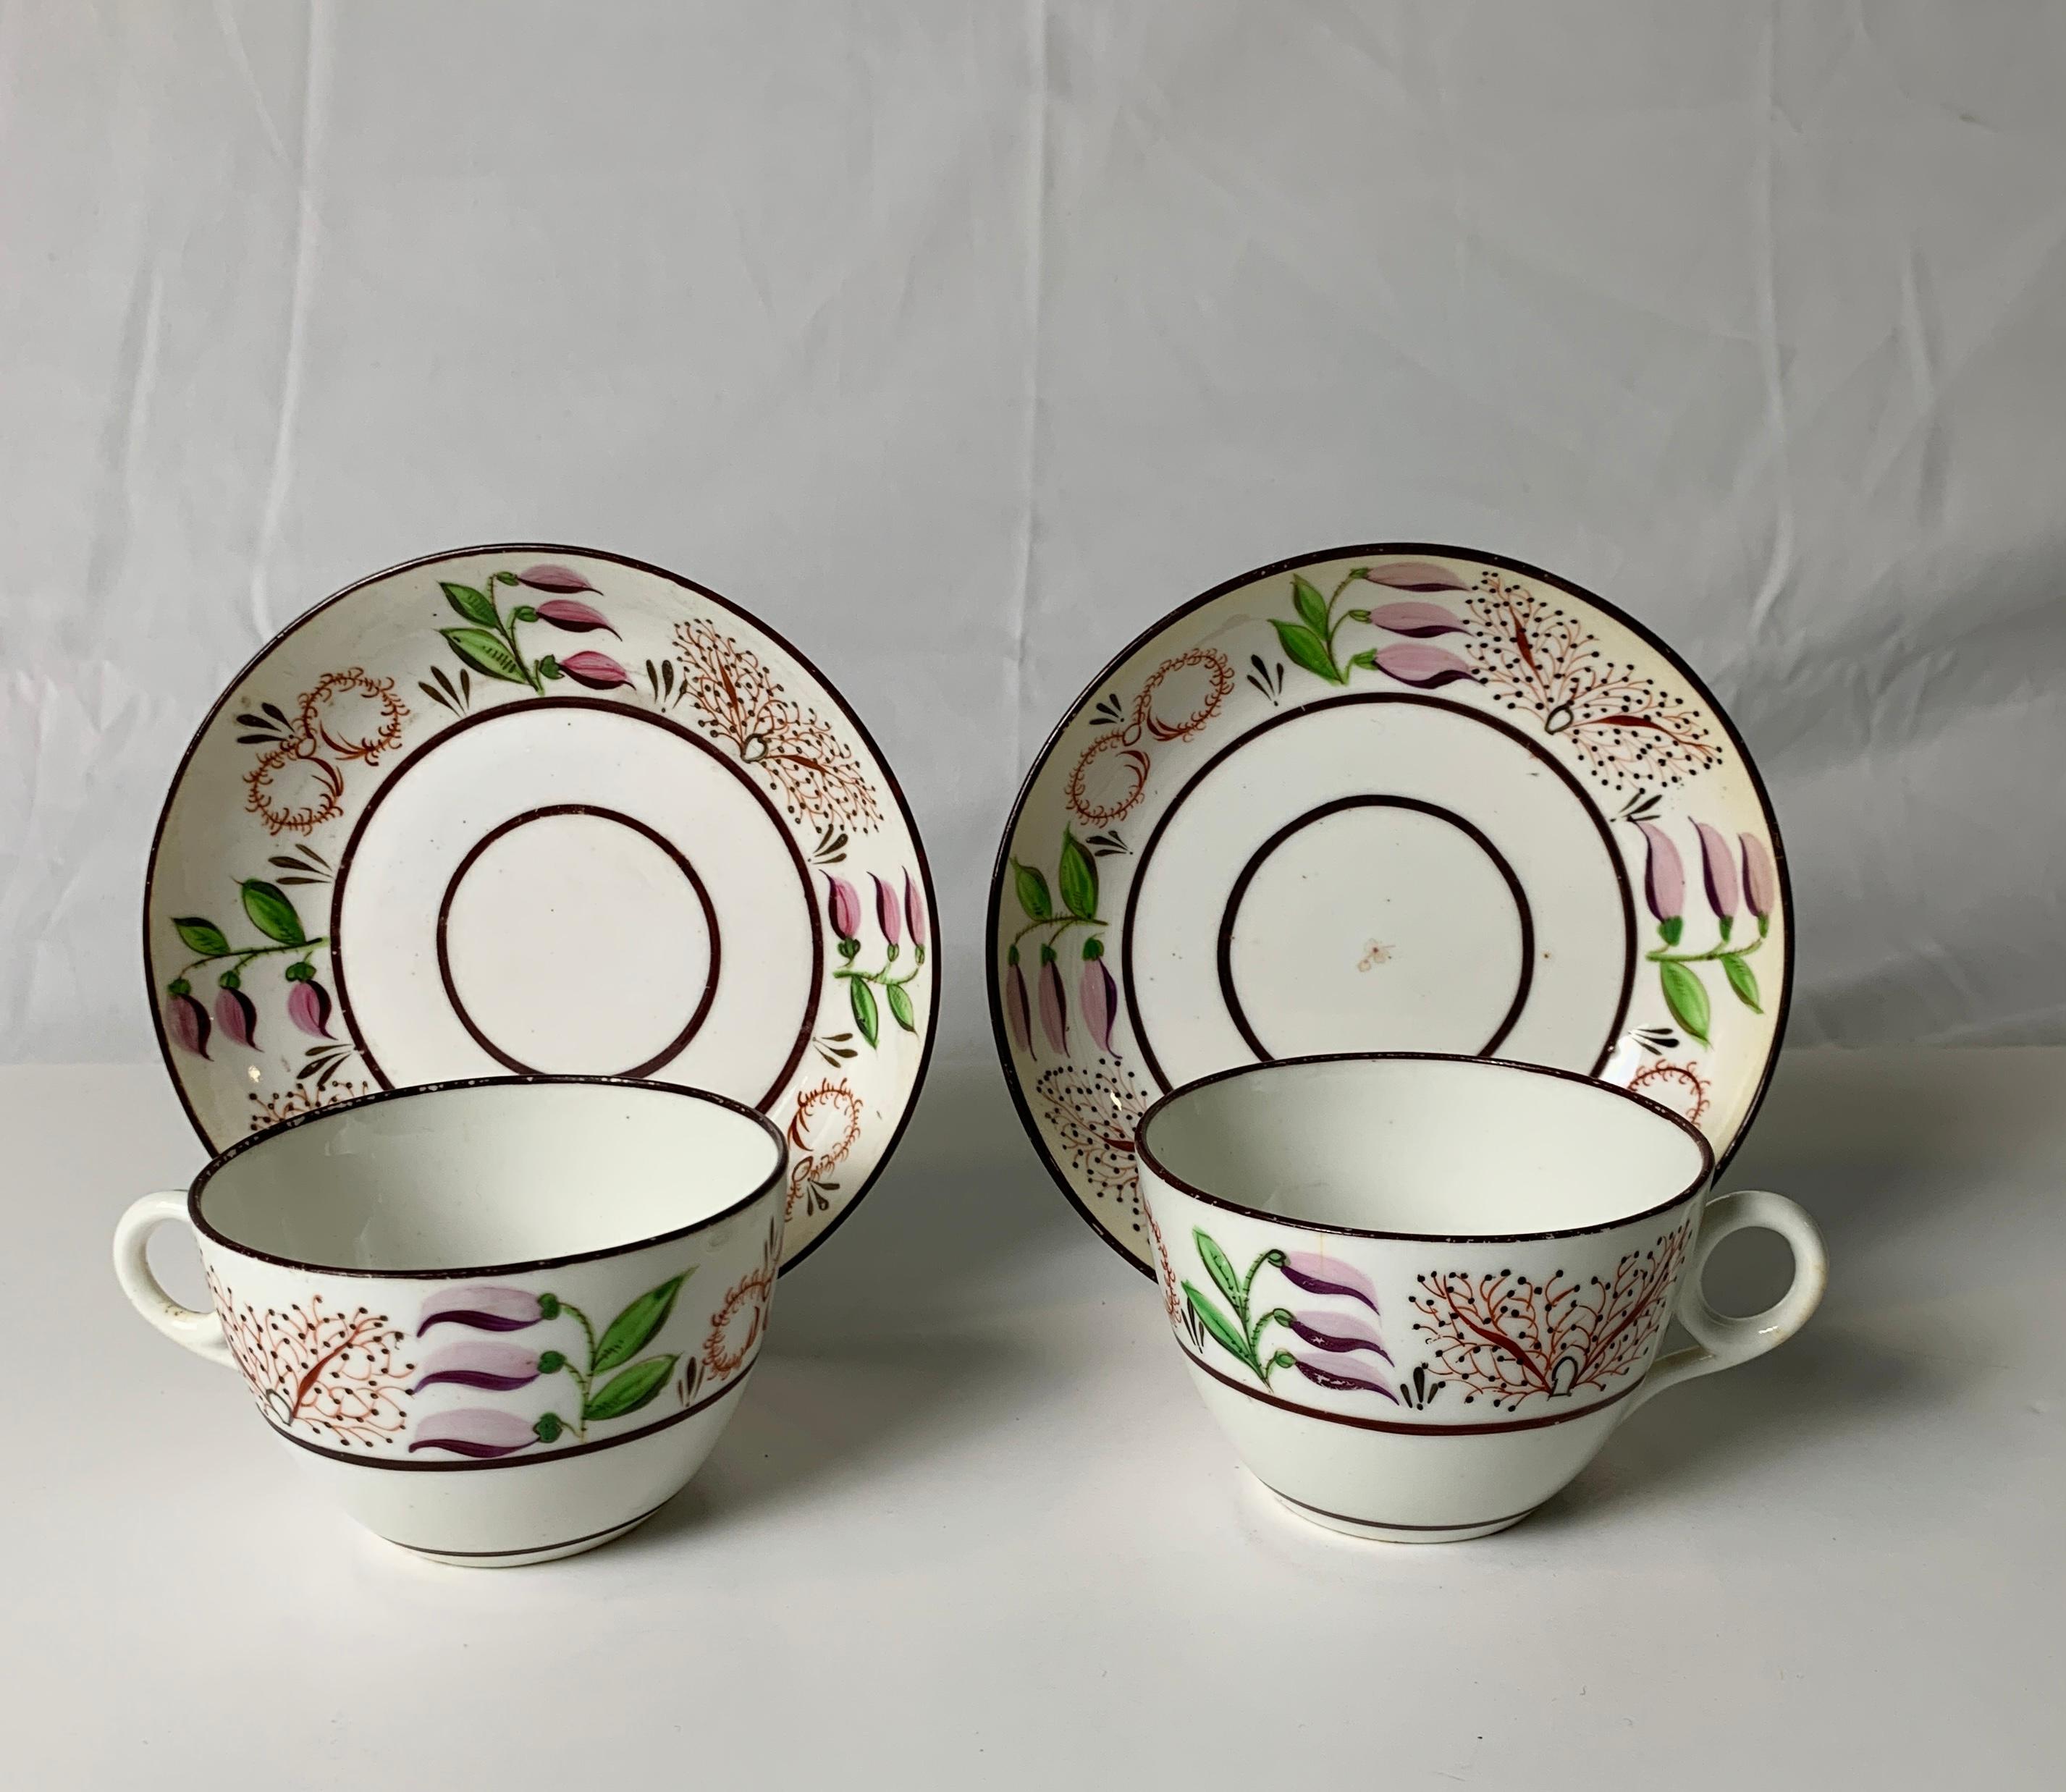 Provenance: The Private Collection of Mario Buatta a pair of porcelain teacups made in England, circa 1825.
This lovely pair of Staffordshire teacups is painted with a delicate floral design featuring lavender-pink buds, green leaves, and red vines